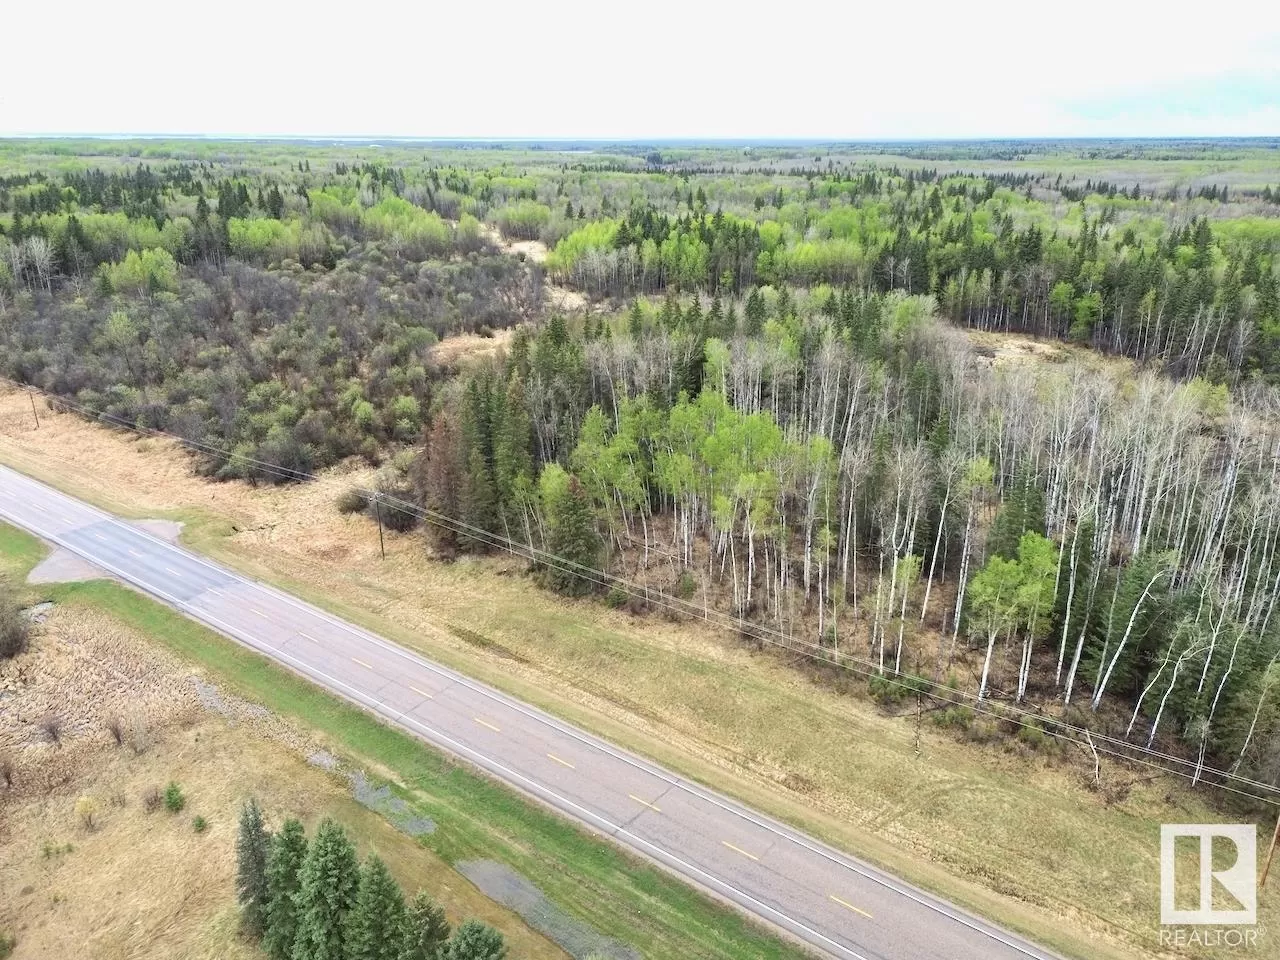 No Building for rent: W4 19-65-1-sw, Rural Athabasca County, Alberta T0A 0M0